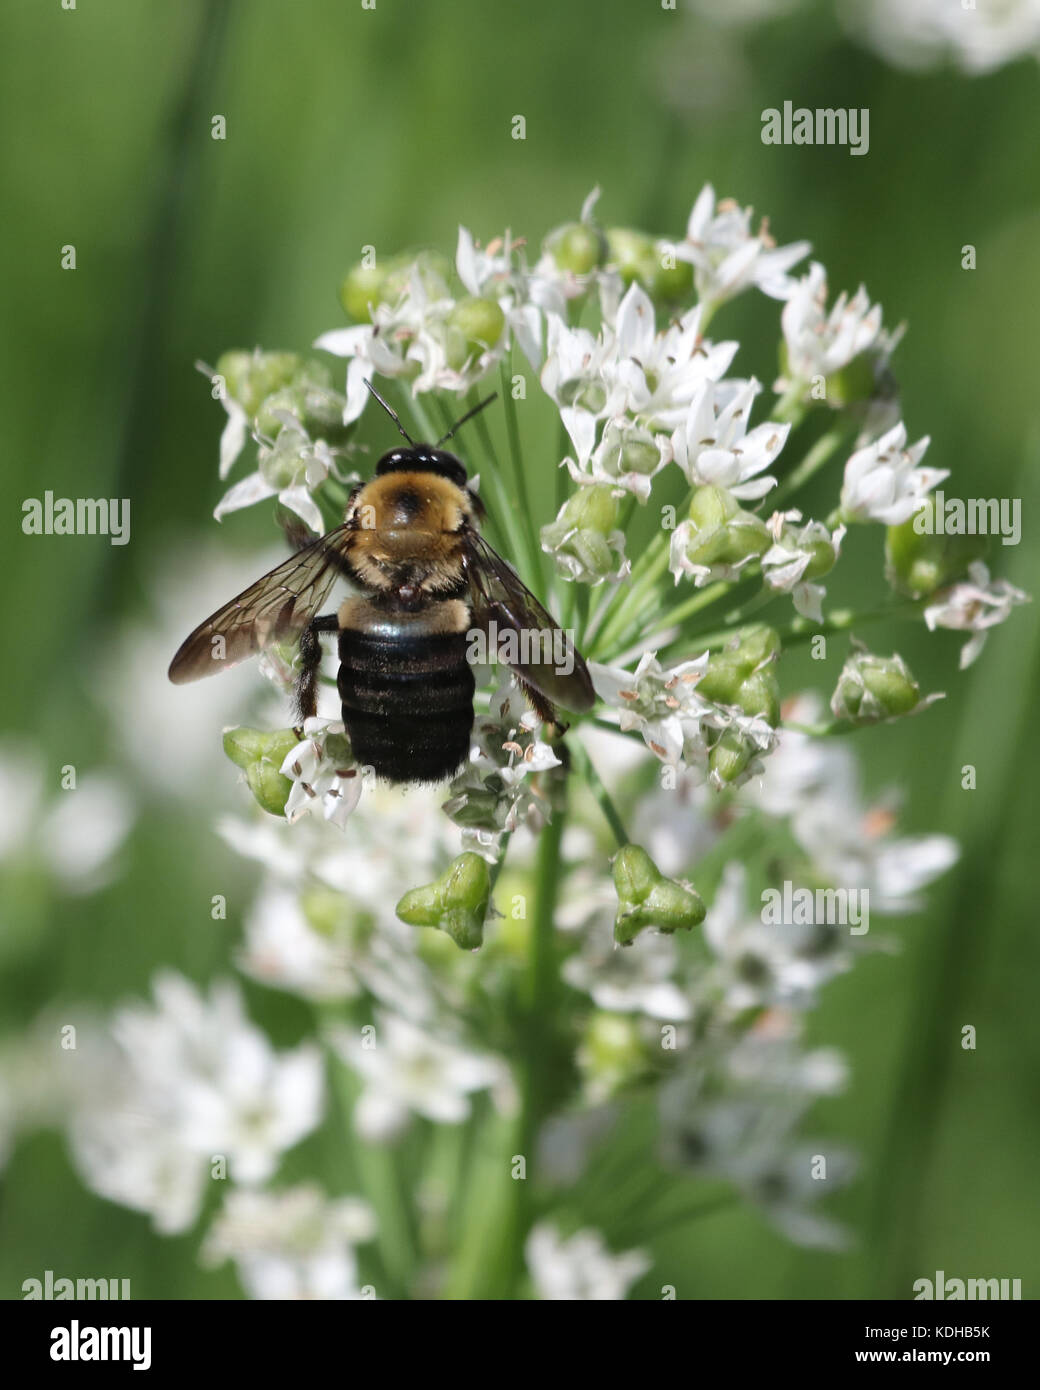 Bumble Bee busy pollinating a white garlic plant Stock Photo